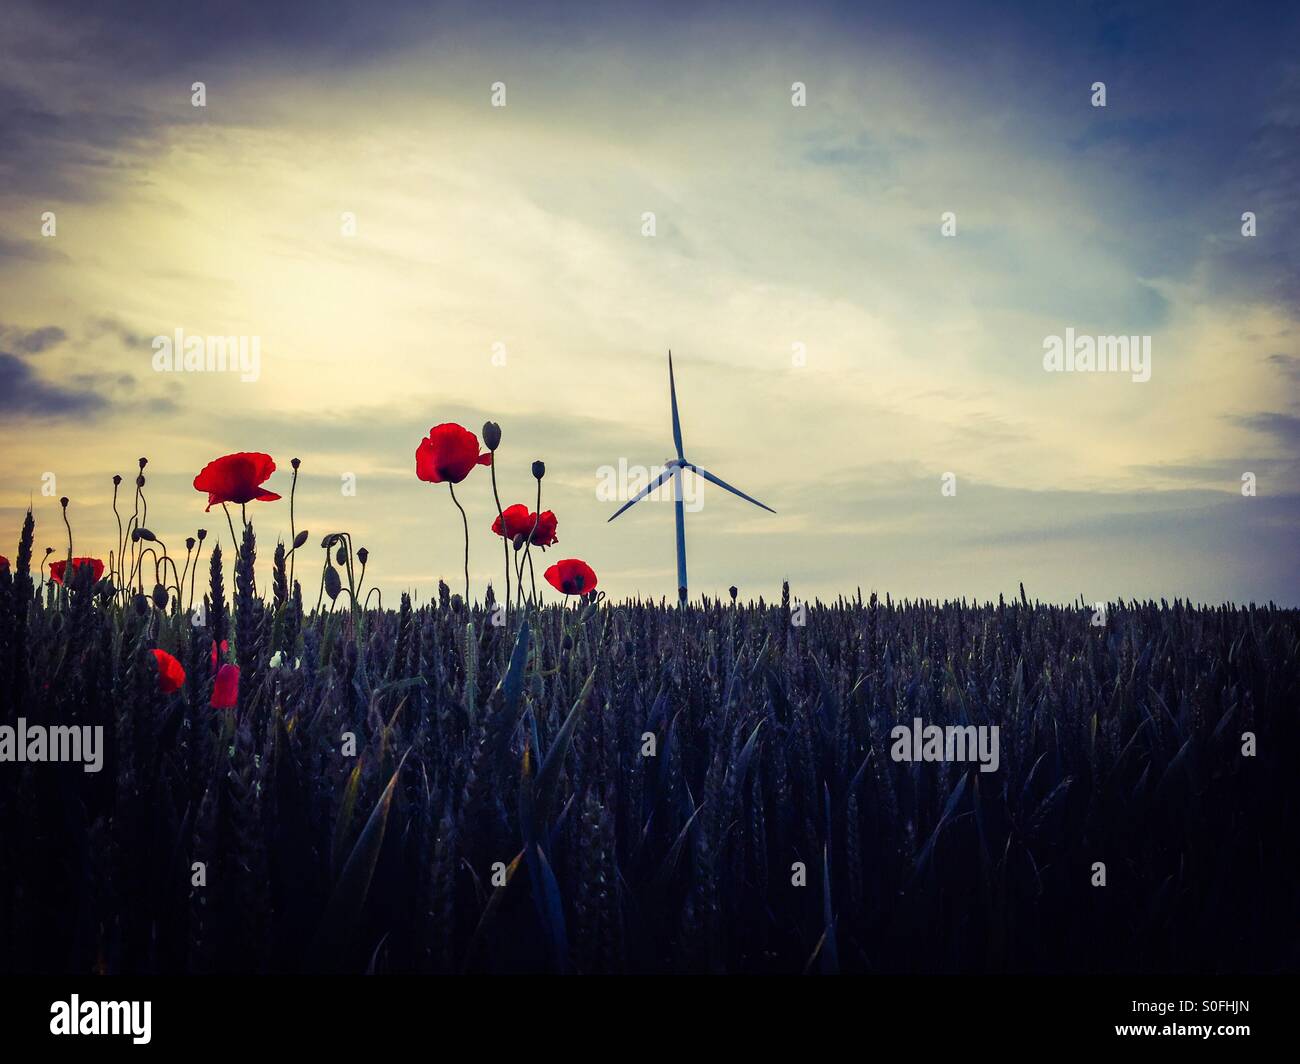 Red poppies in field with wind turbine Stock Photo